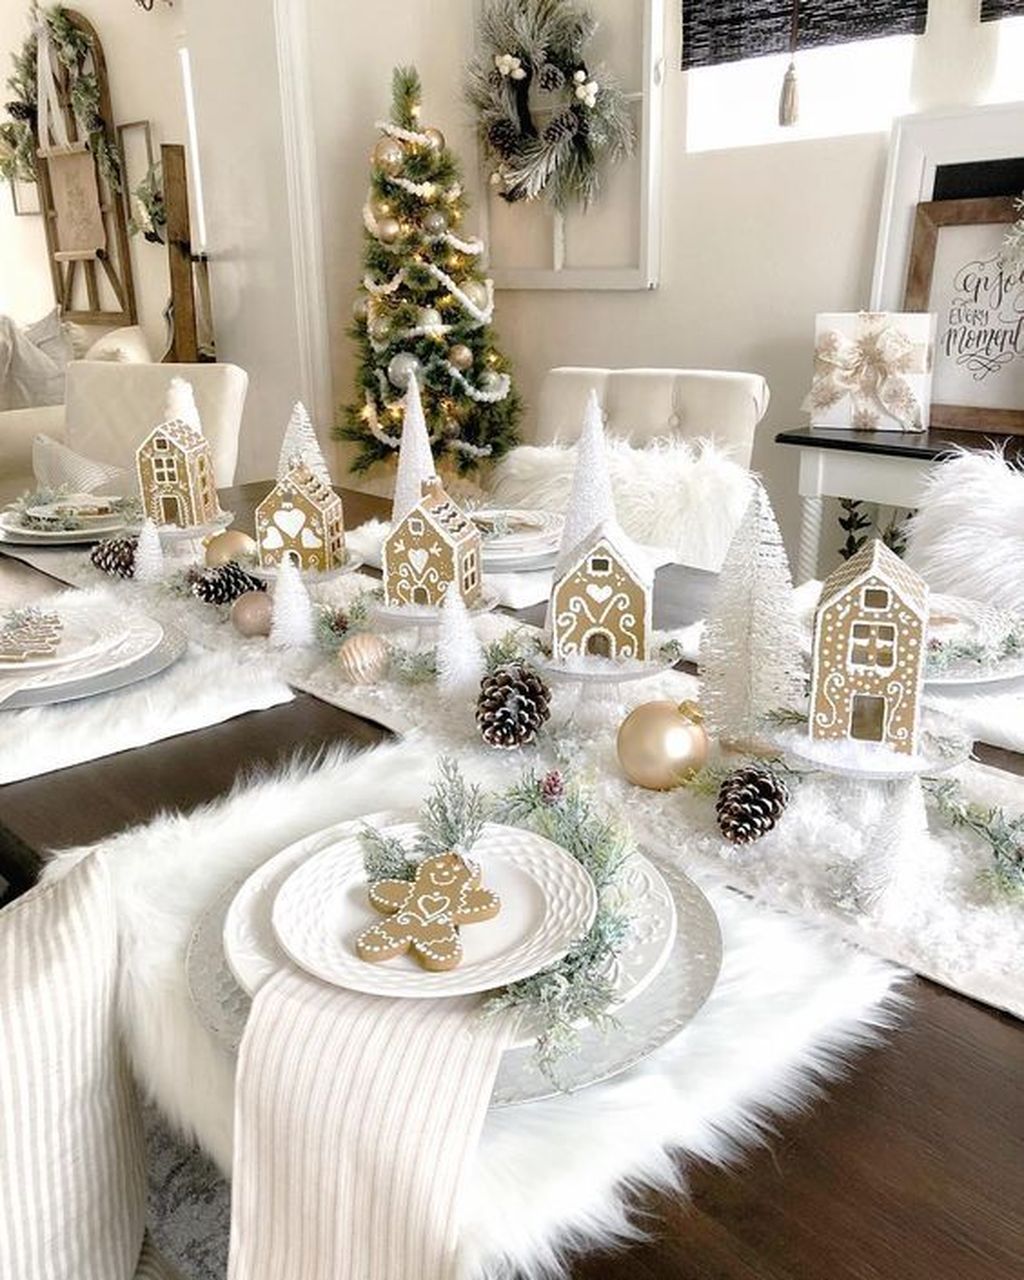 36 Beautiful Christmas Table Centerpieces For Your Dining Room - HMDCRTN